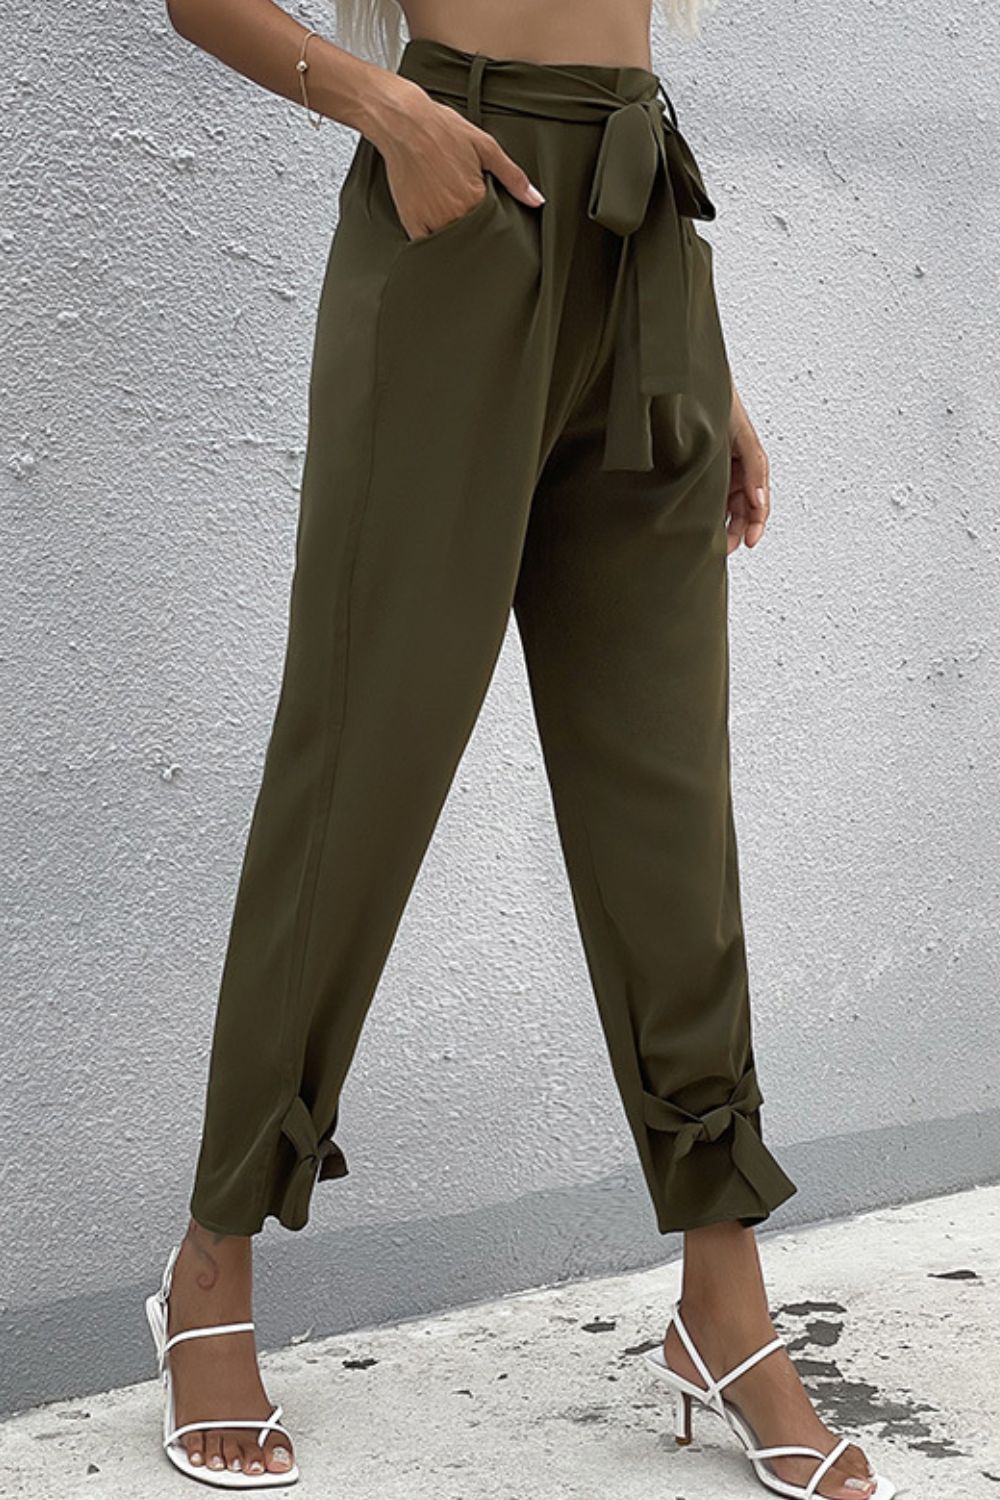 Tie Detail Belted Pants with Pockets